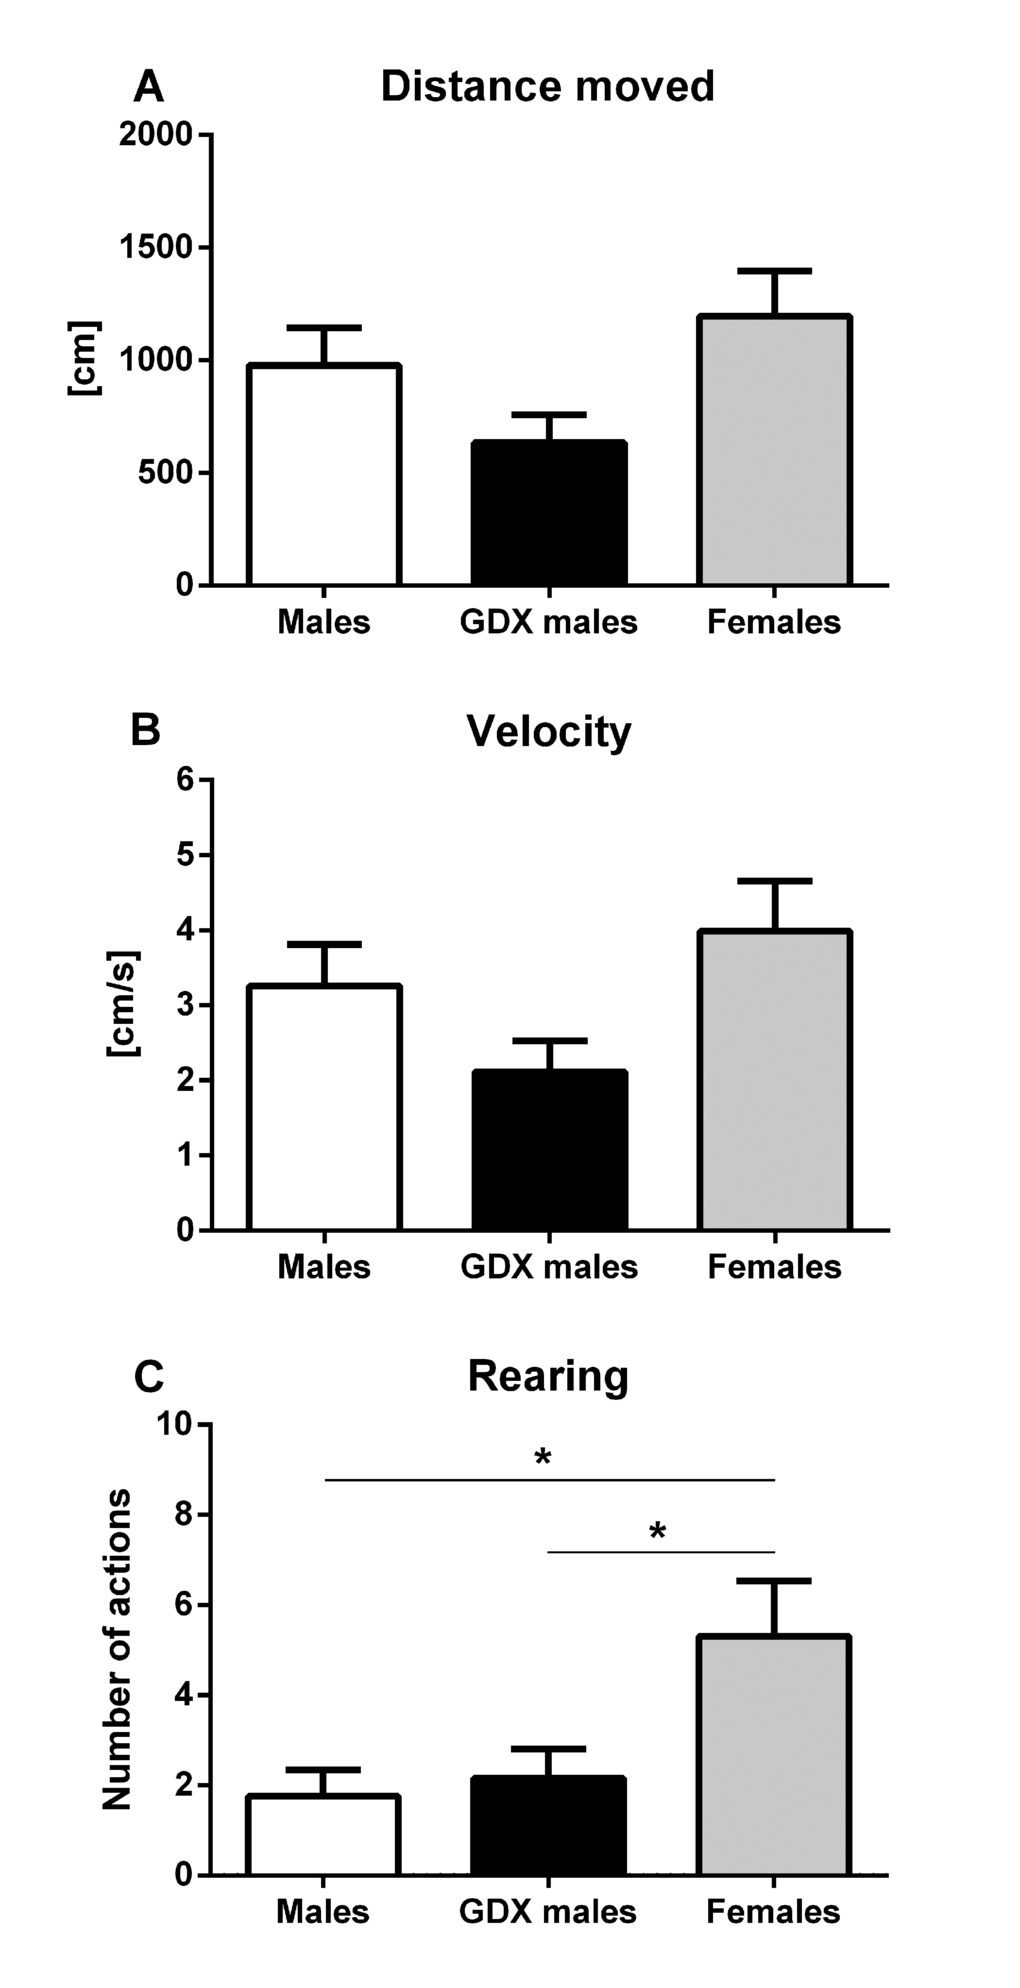 Locomotor activity of aged rats in the open field test. (A, B) Horizontal and (C) vertical locomotor activity for males (white bar), GDX males (black bar) and females (grey bar). There were no significant differences between groups in horizontal locomotor activity. Females had a significantly higher vertical locomotor activity compared to both male groups (p